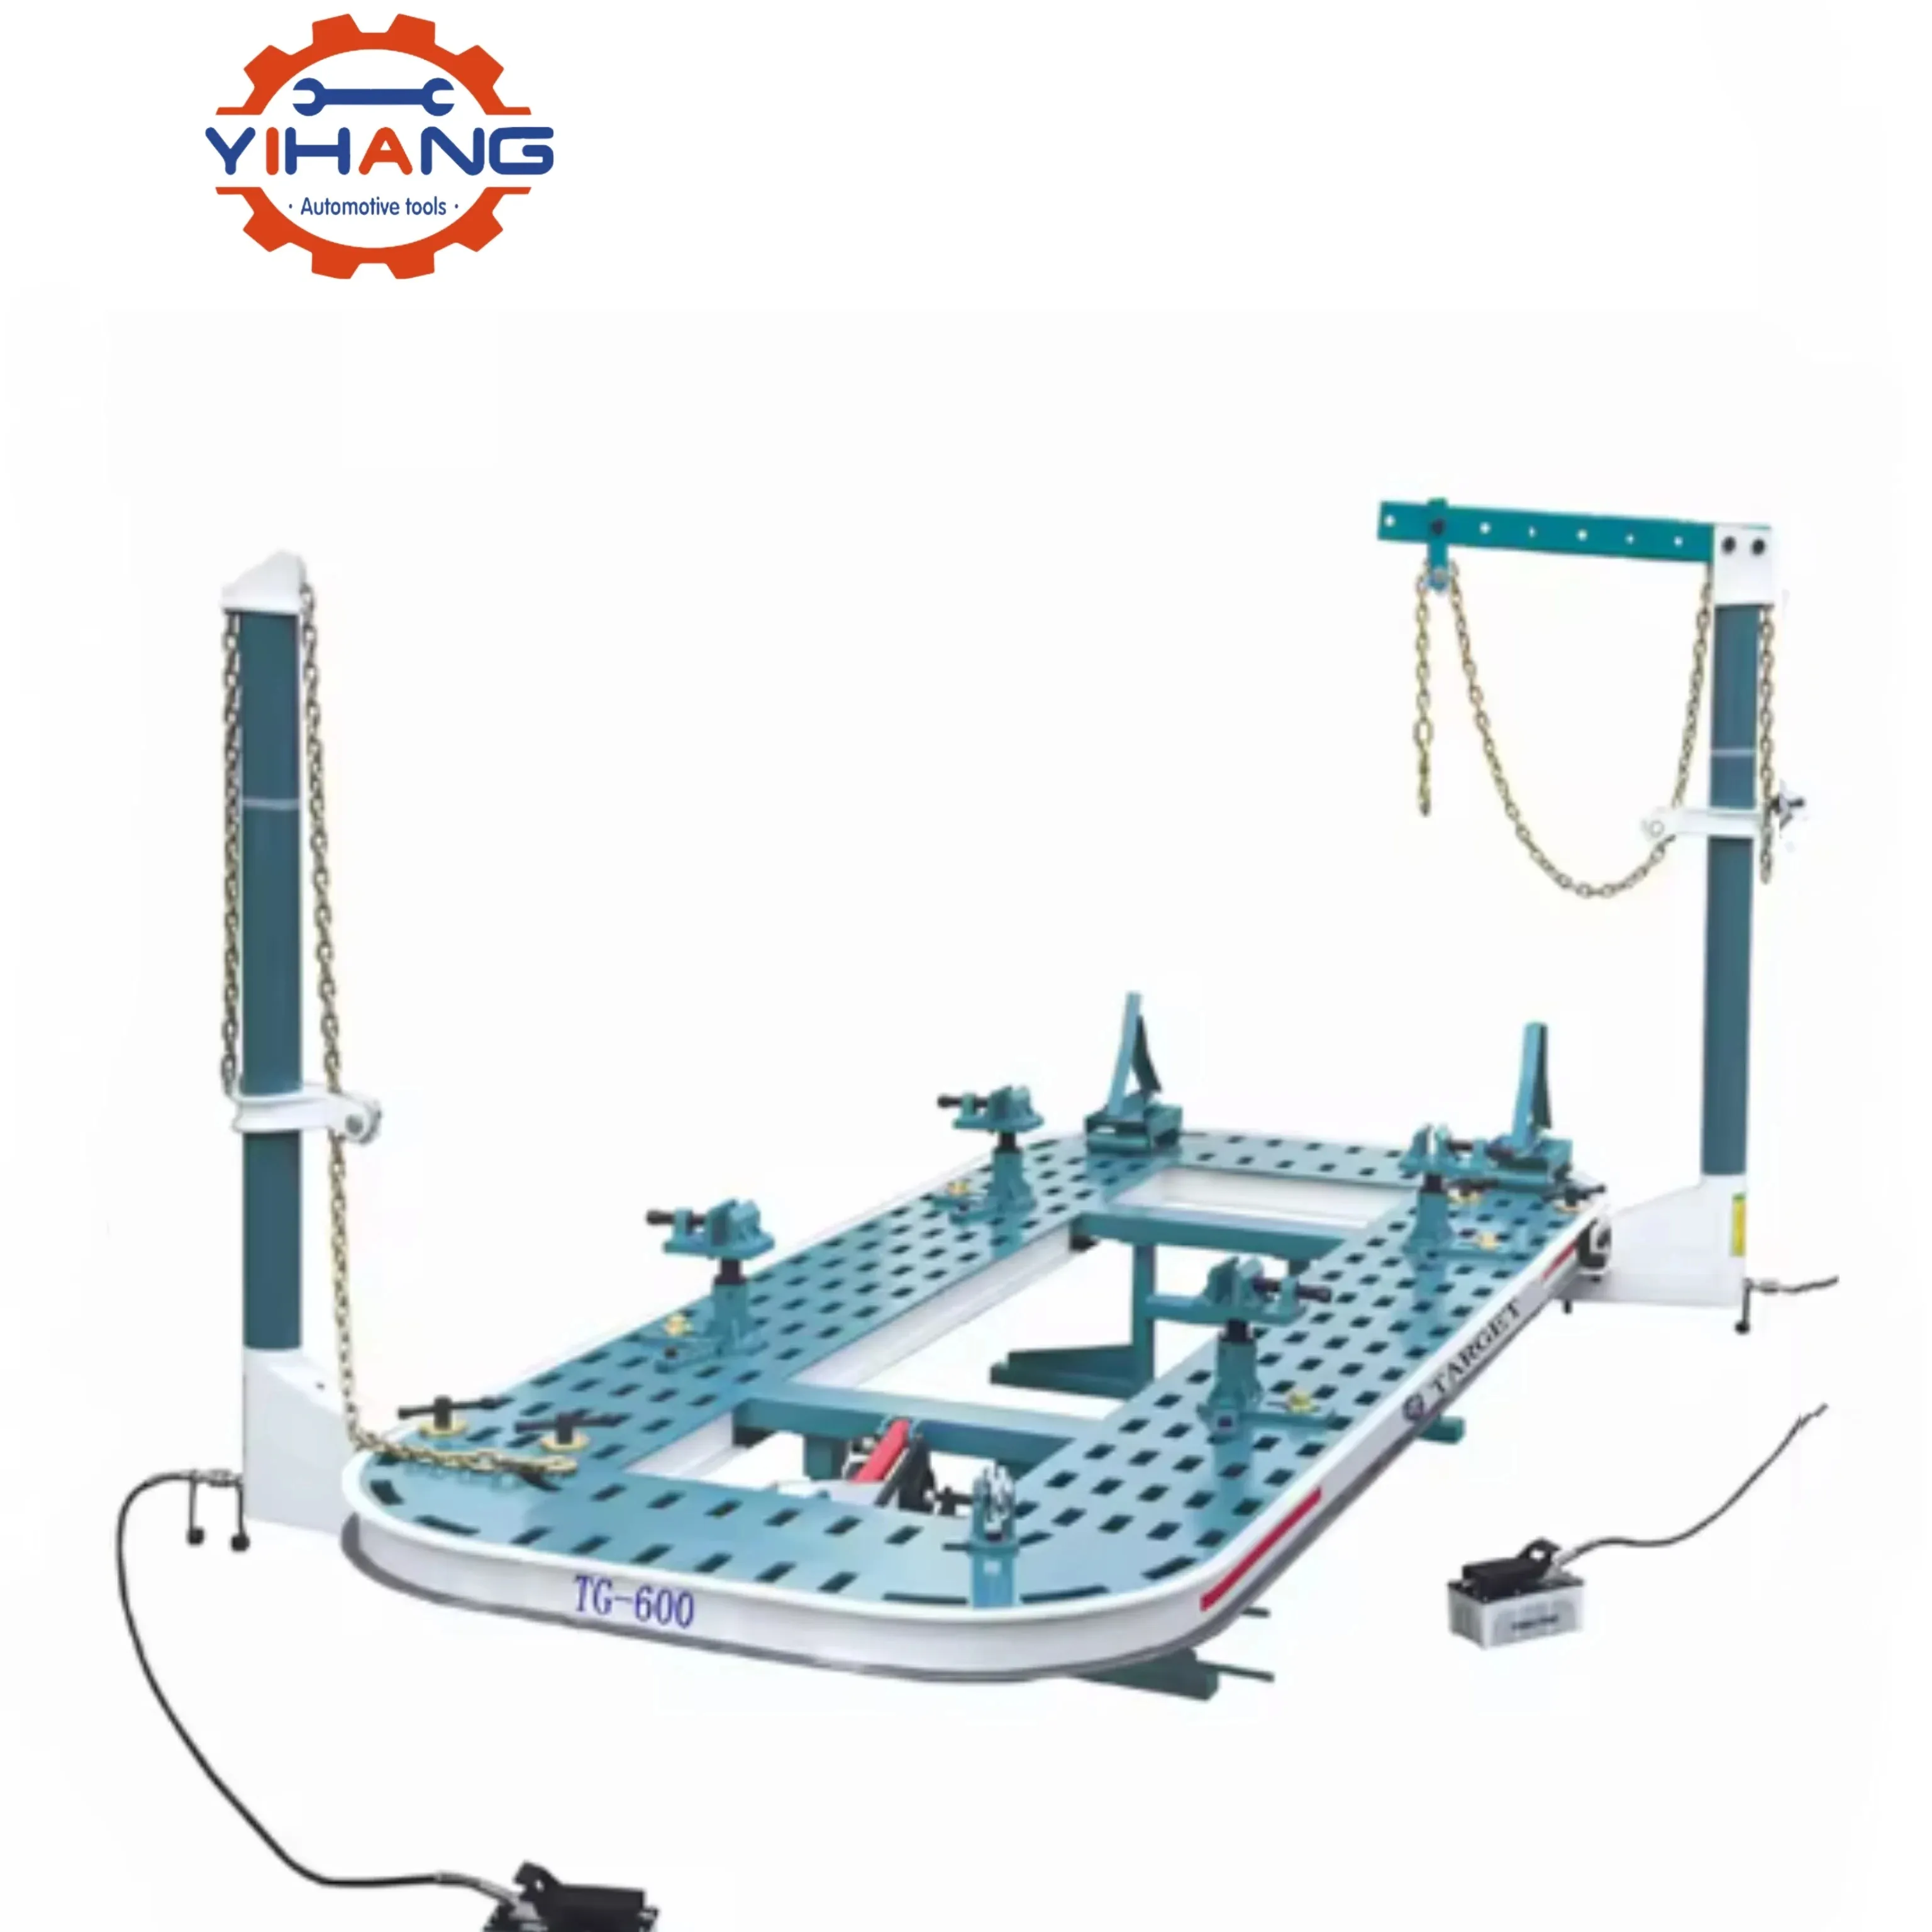 CE Certificated Car Collision Repair System Auto Body Frame Straightening Machine for Vehicle Cosmetic and Structural Repair